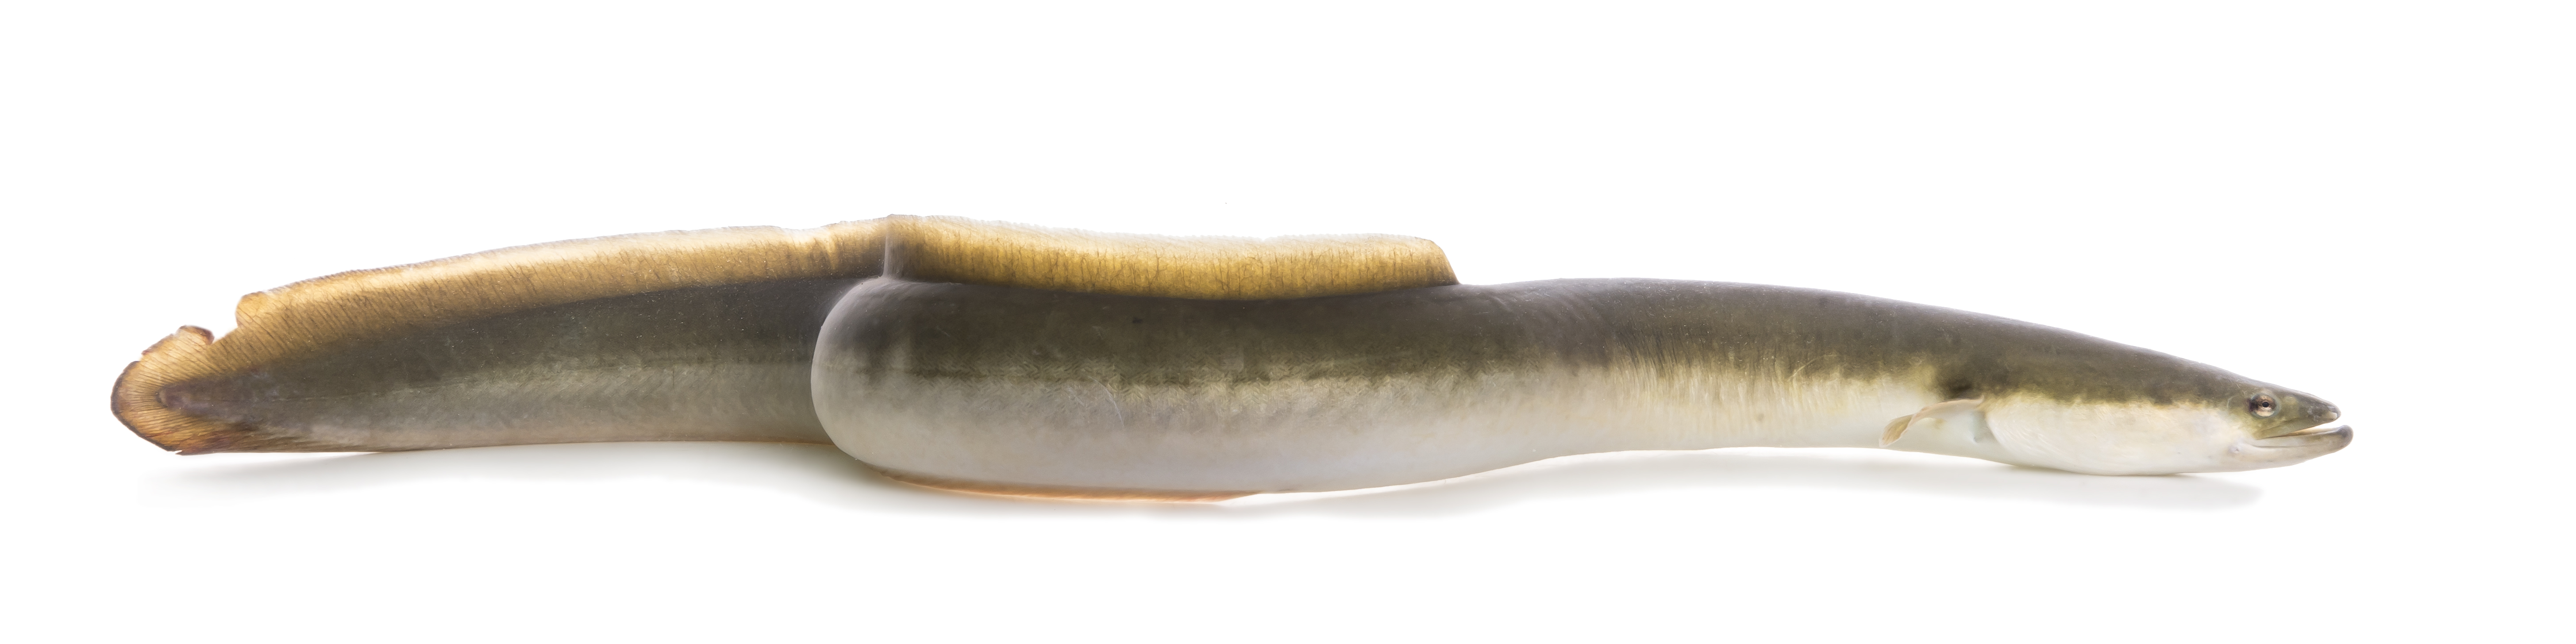 A long eel with a yellow dorsal fin, green coloring on the top, and white coloring on the bottom